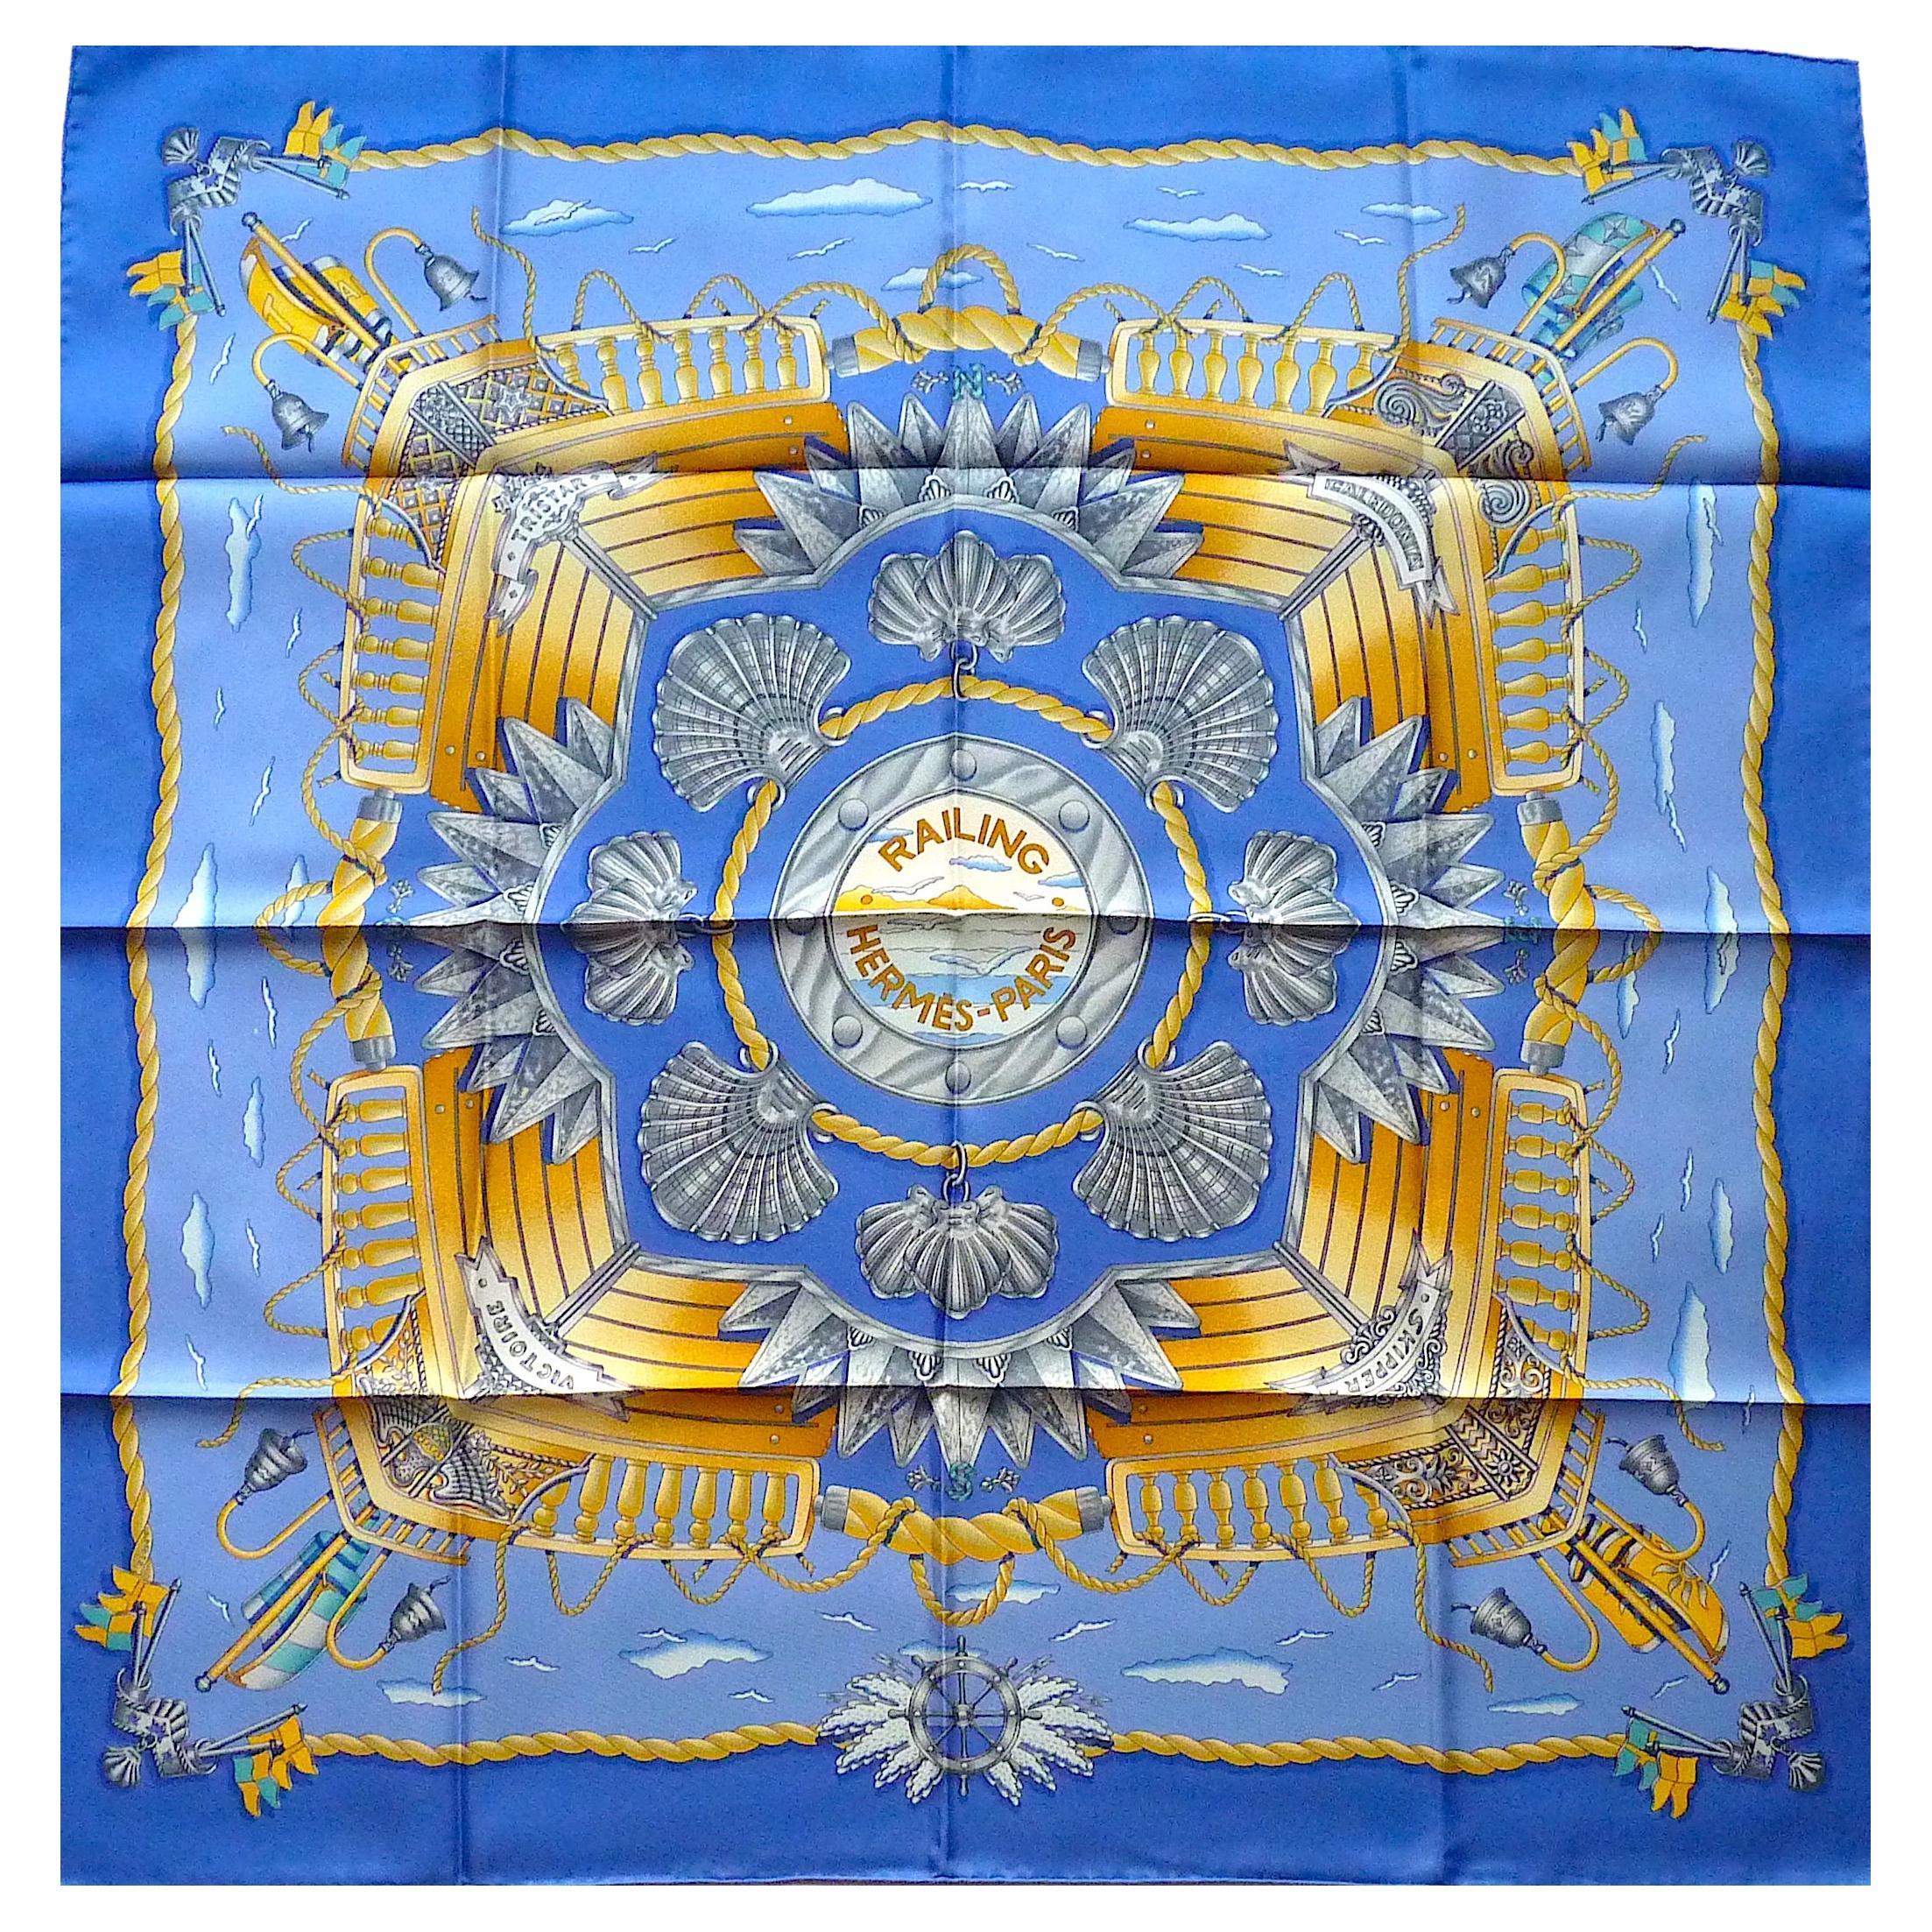 HERMES Silk Scarf "Railing" PERFECT CONDITION, designed by J Metz in 1998 For Sale